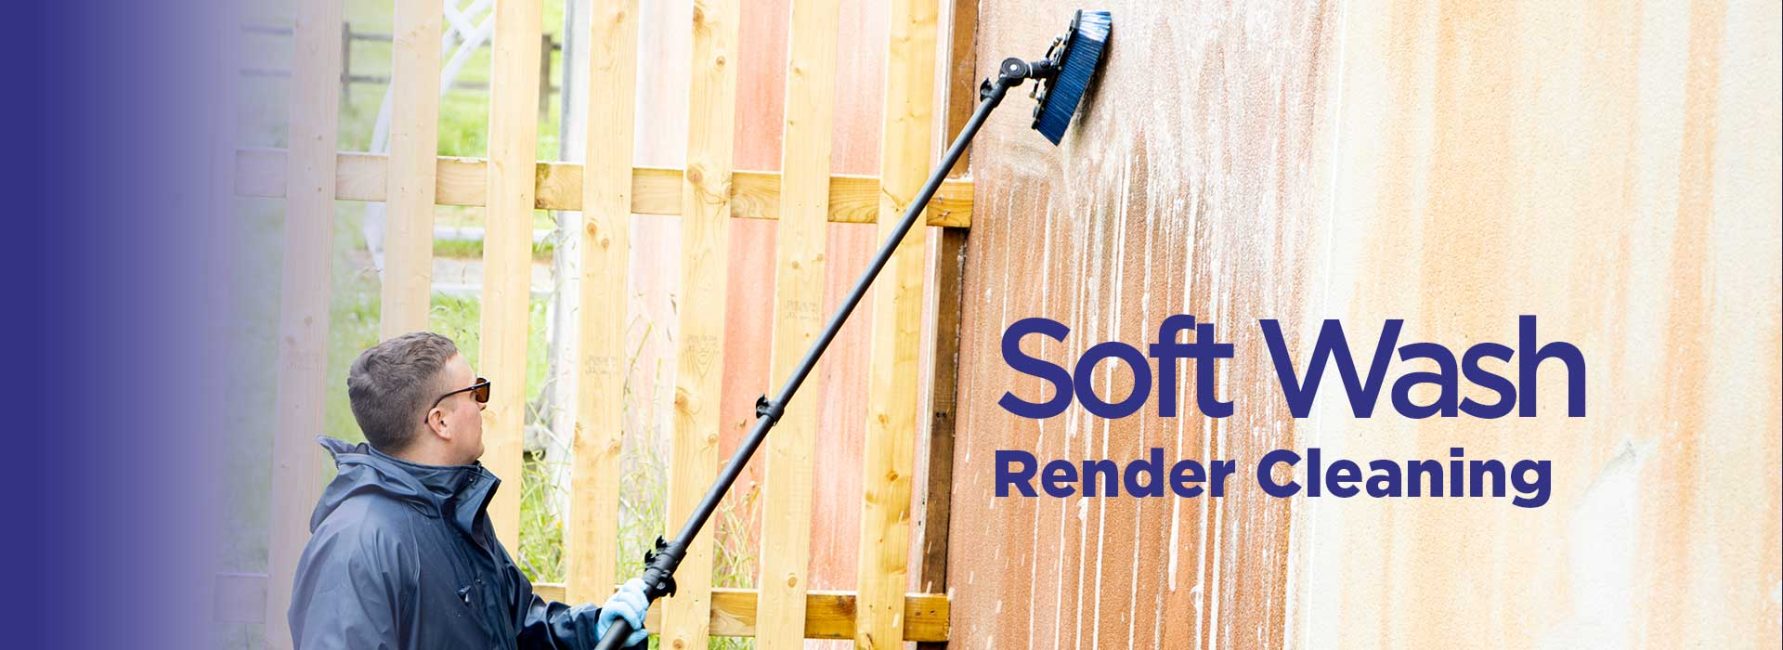 effective render cleaning with soft wash equipment